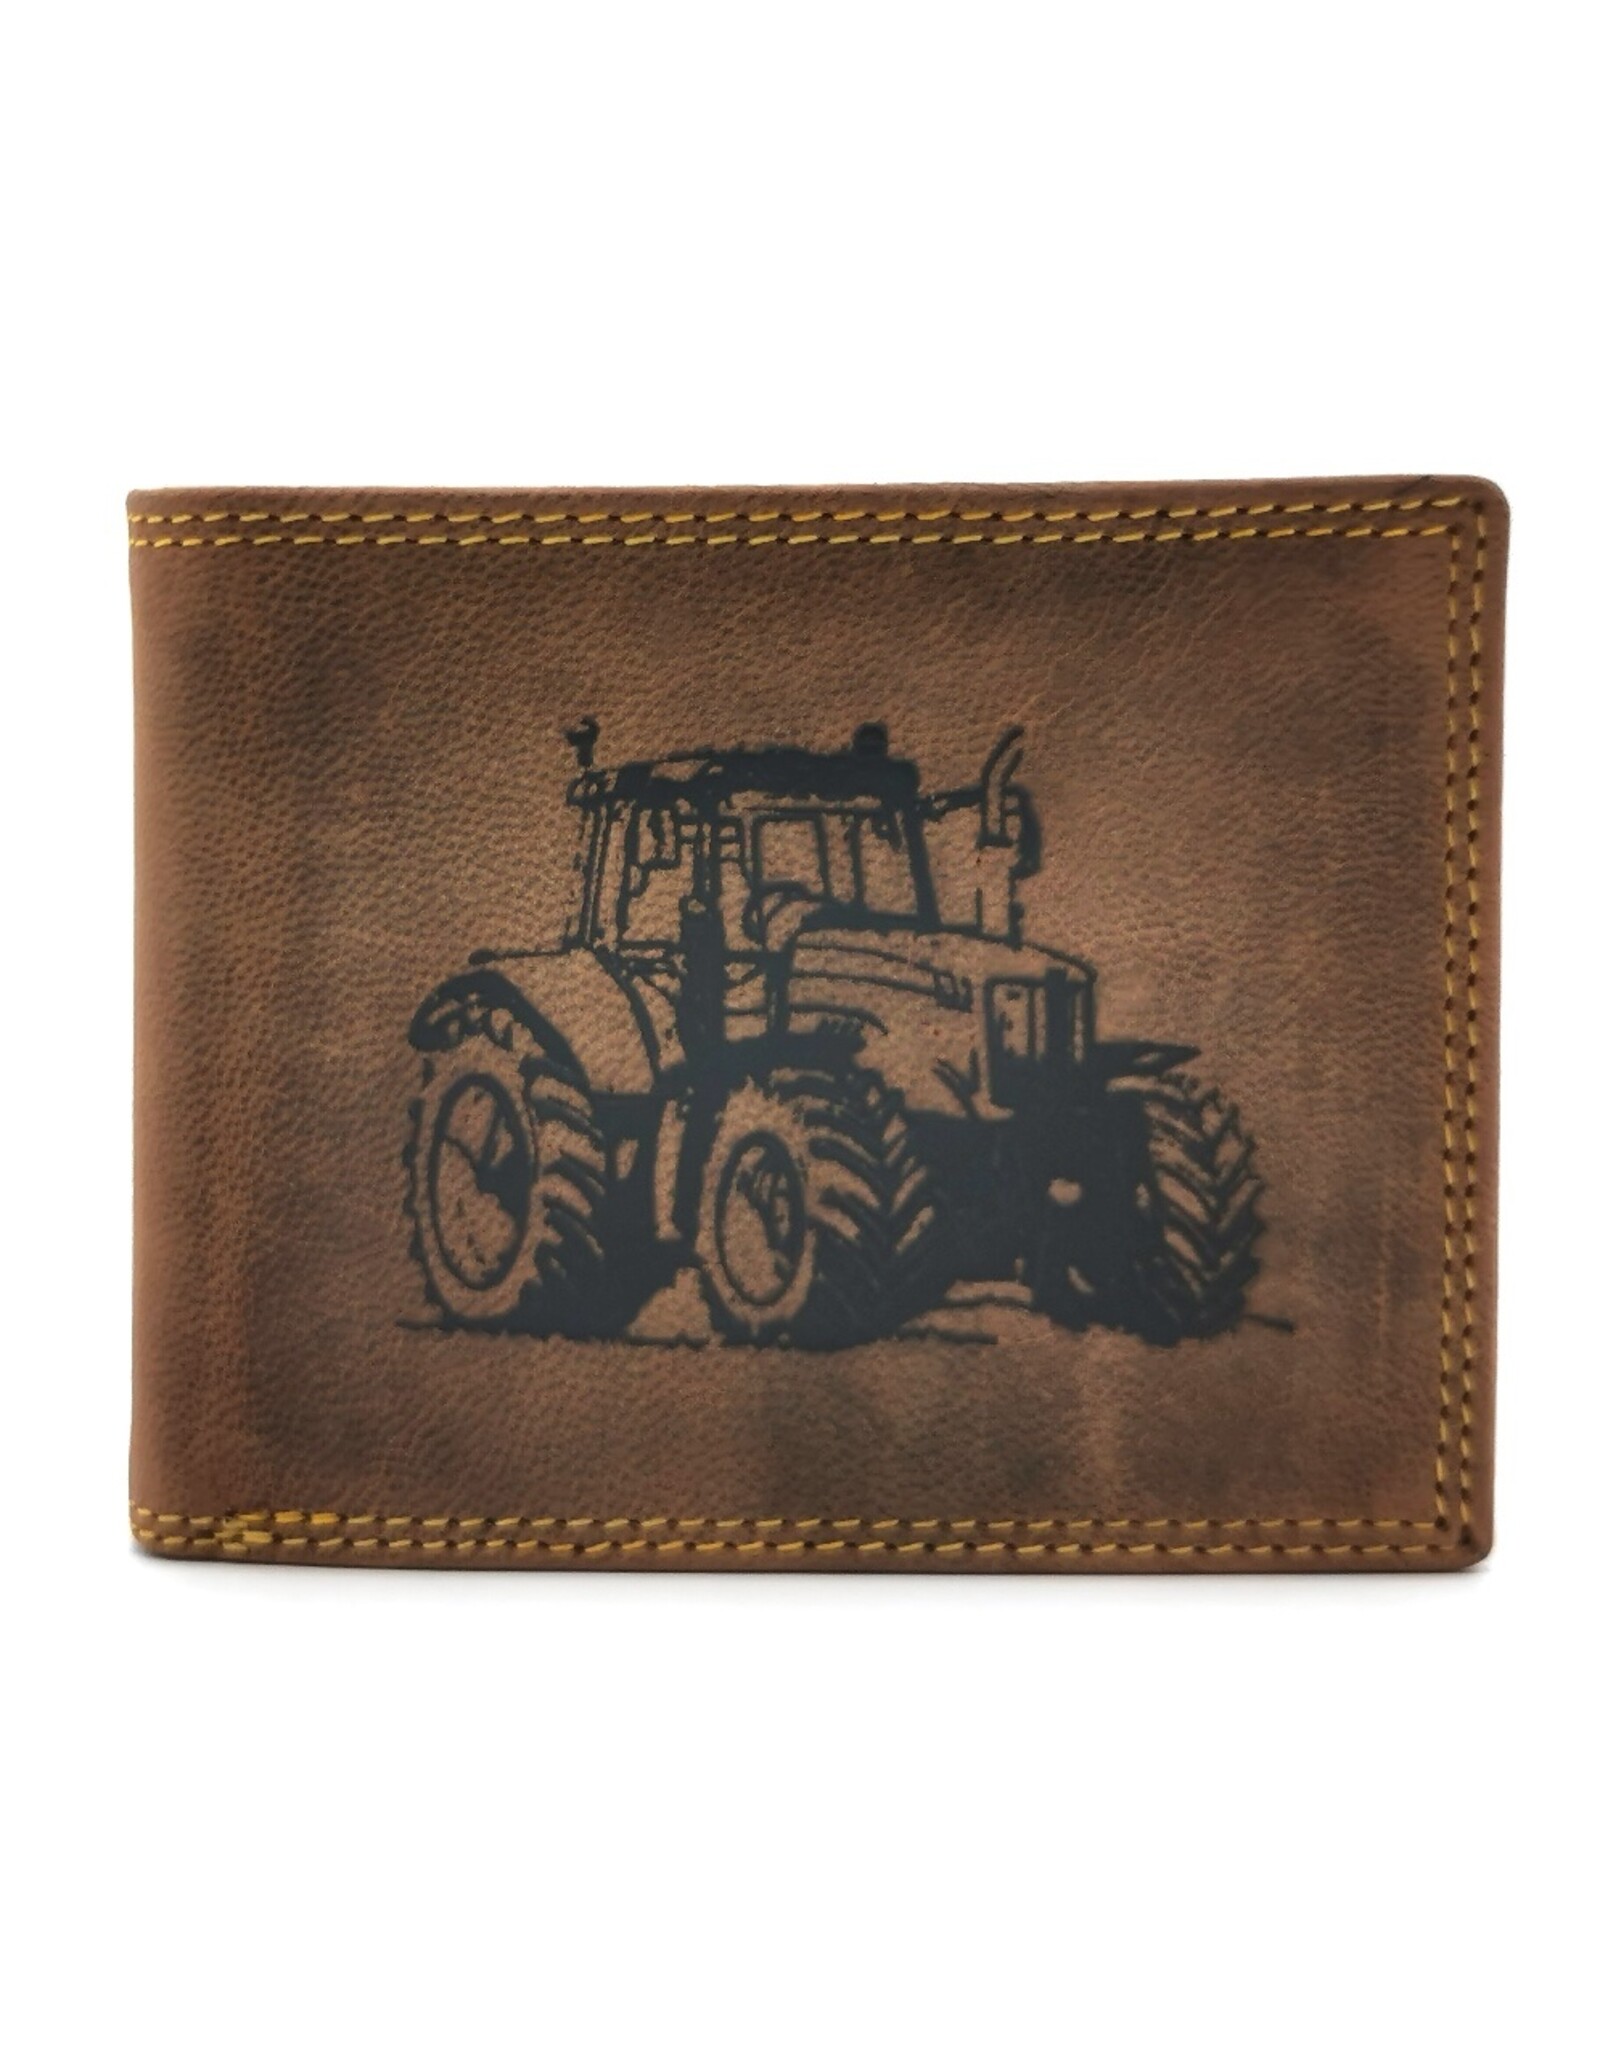 Hunters Leather wallets - Leather Wallet with Tractor print brown